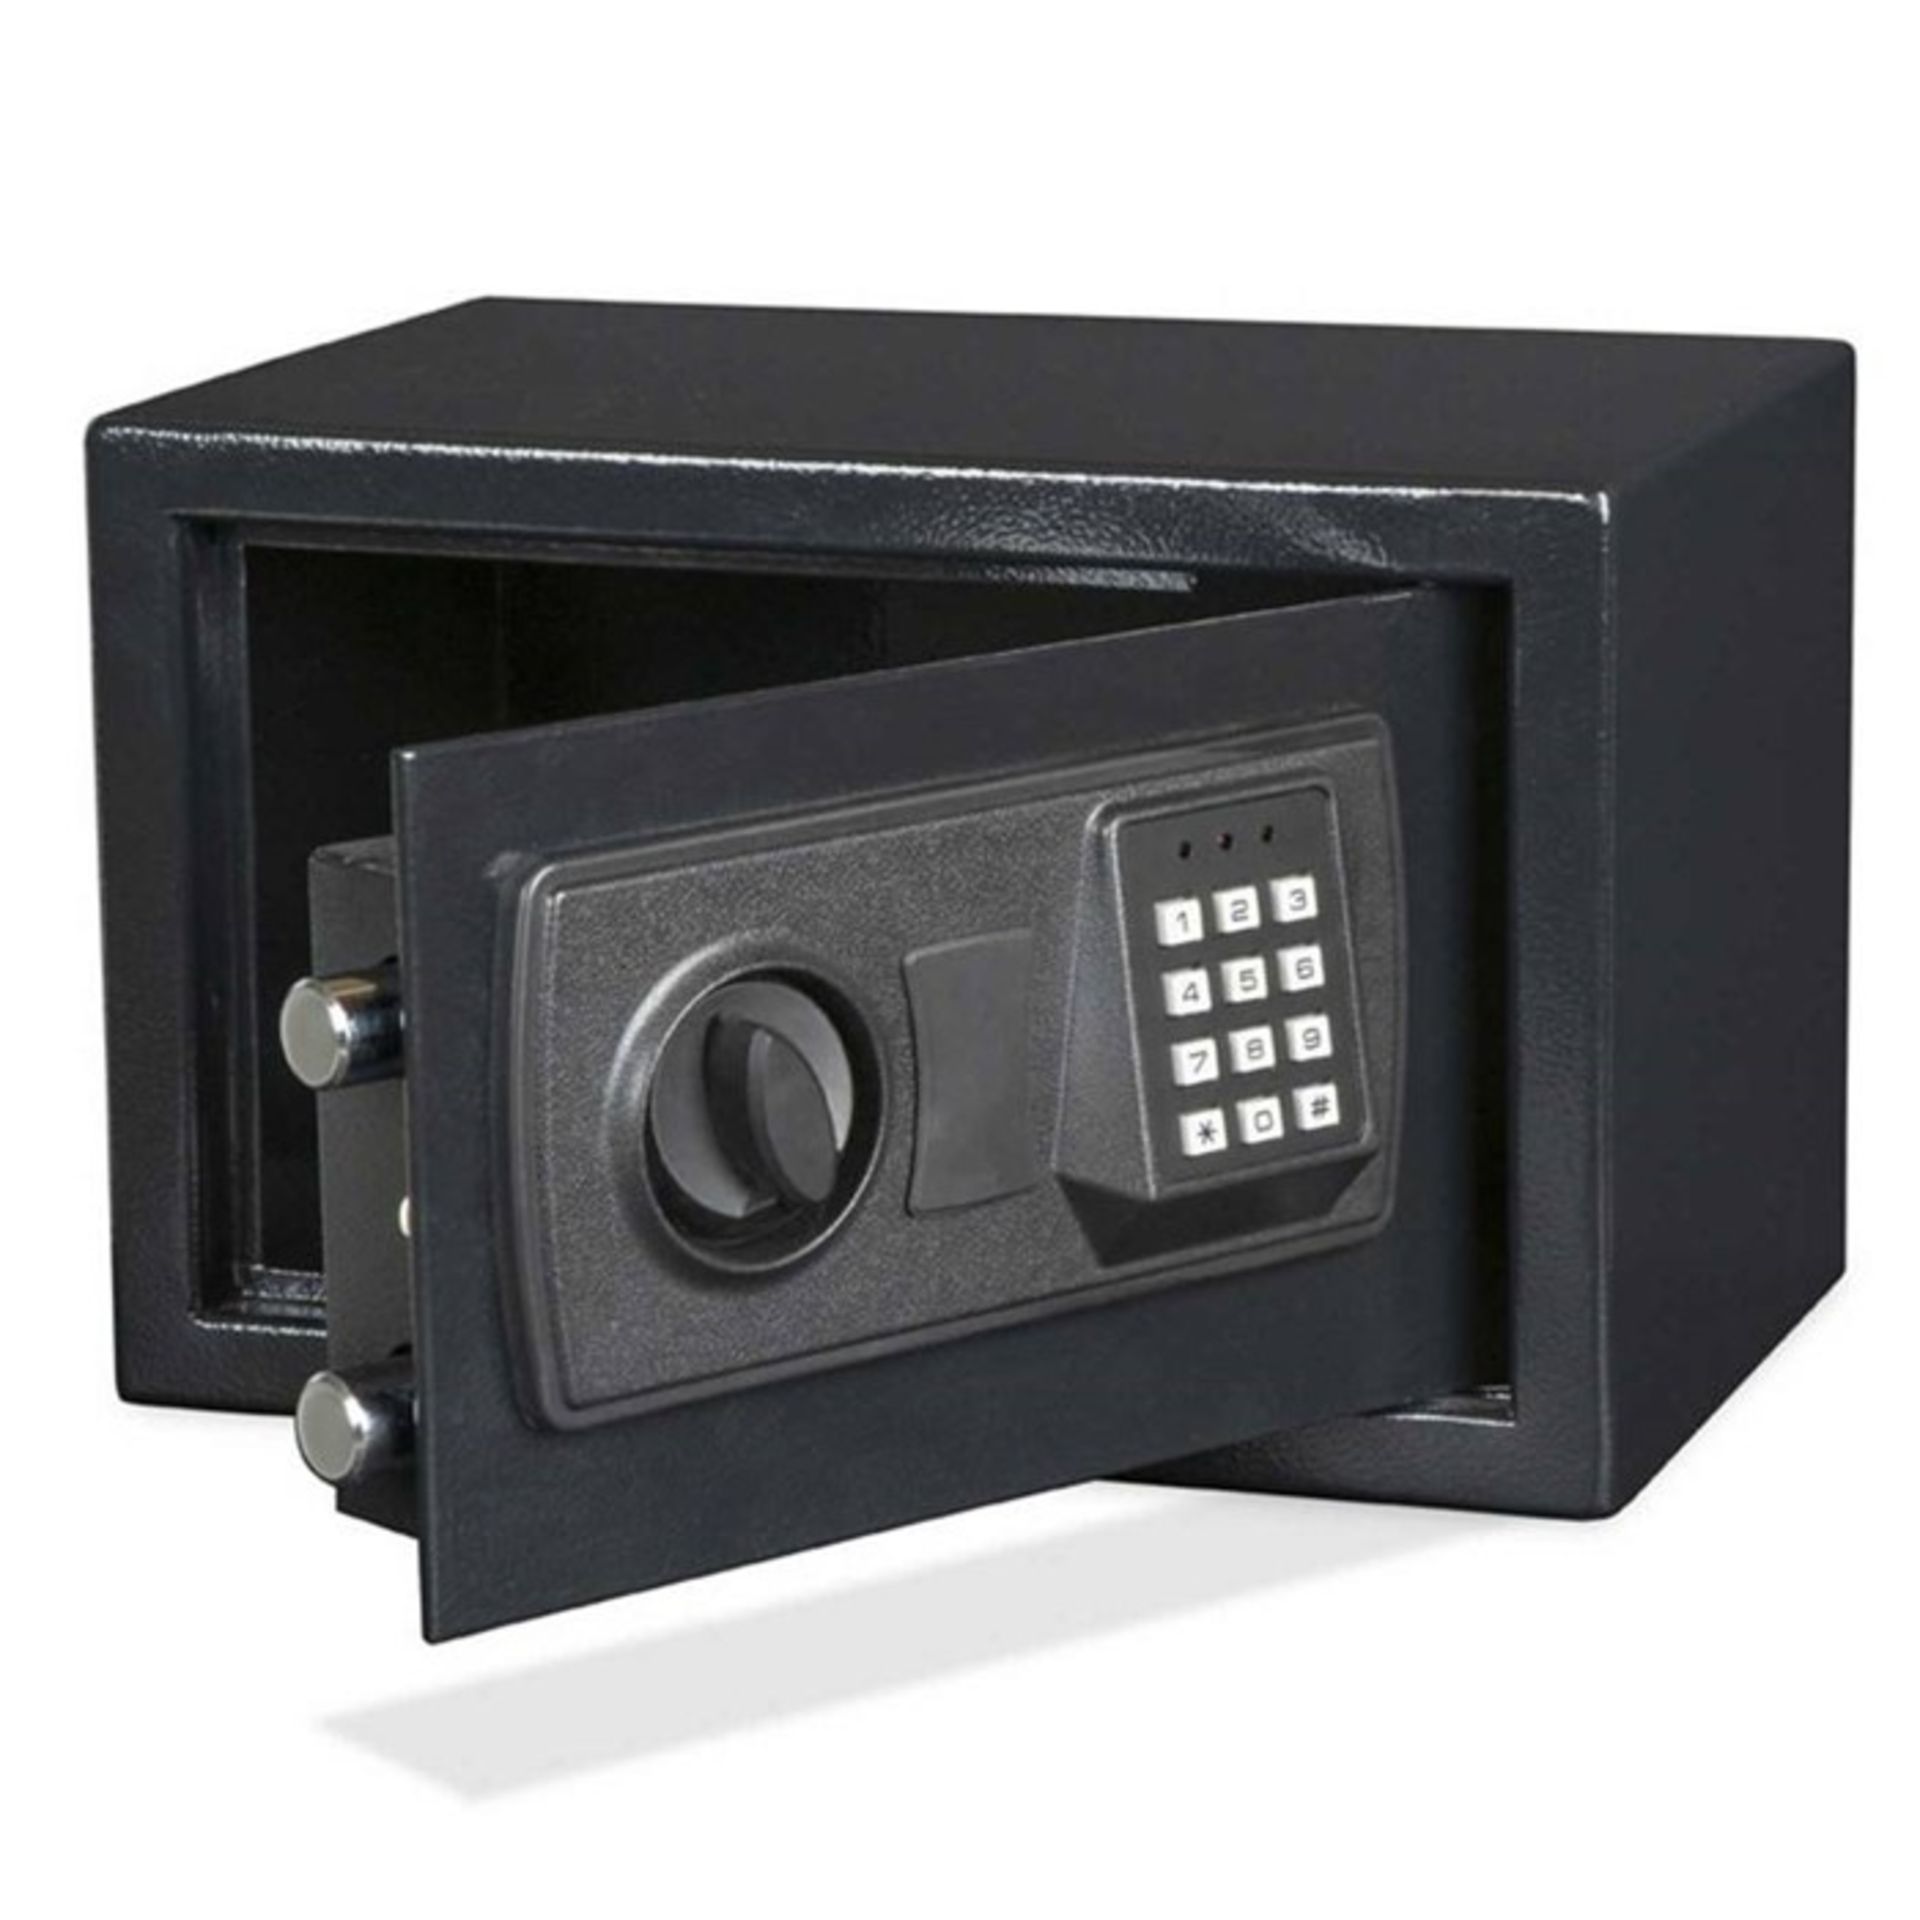 ME : 1 AS NEW BOXED BURTON STANDARD MKII SAFE - MODEL SIZE 1 - 200 X 310 X 200MM / RRP £61.20 (